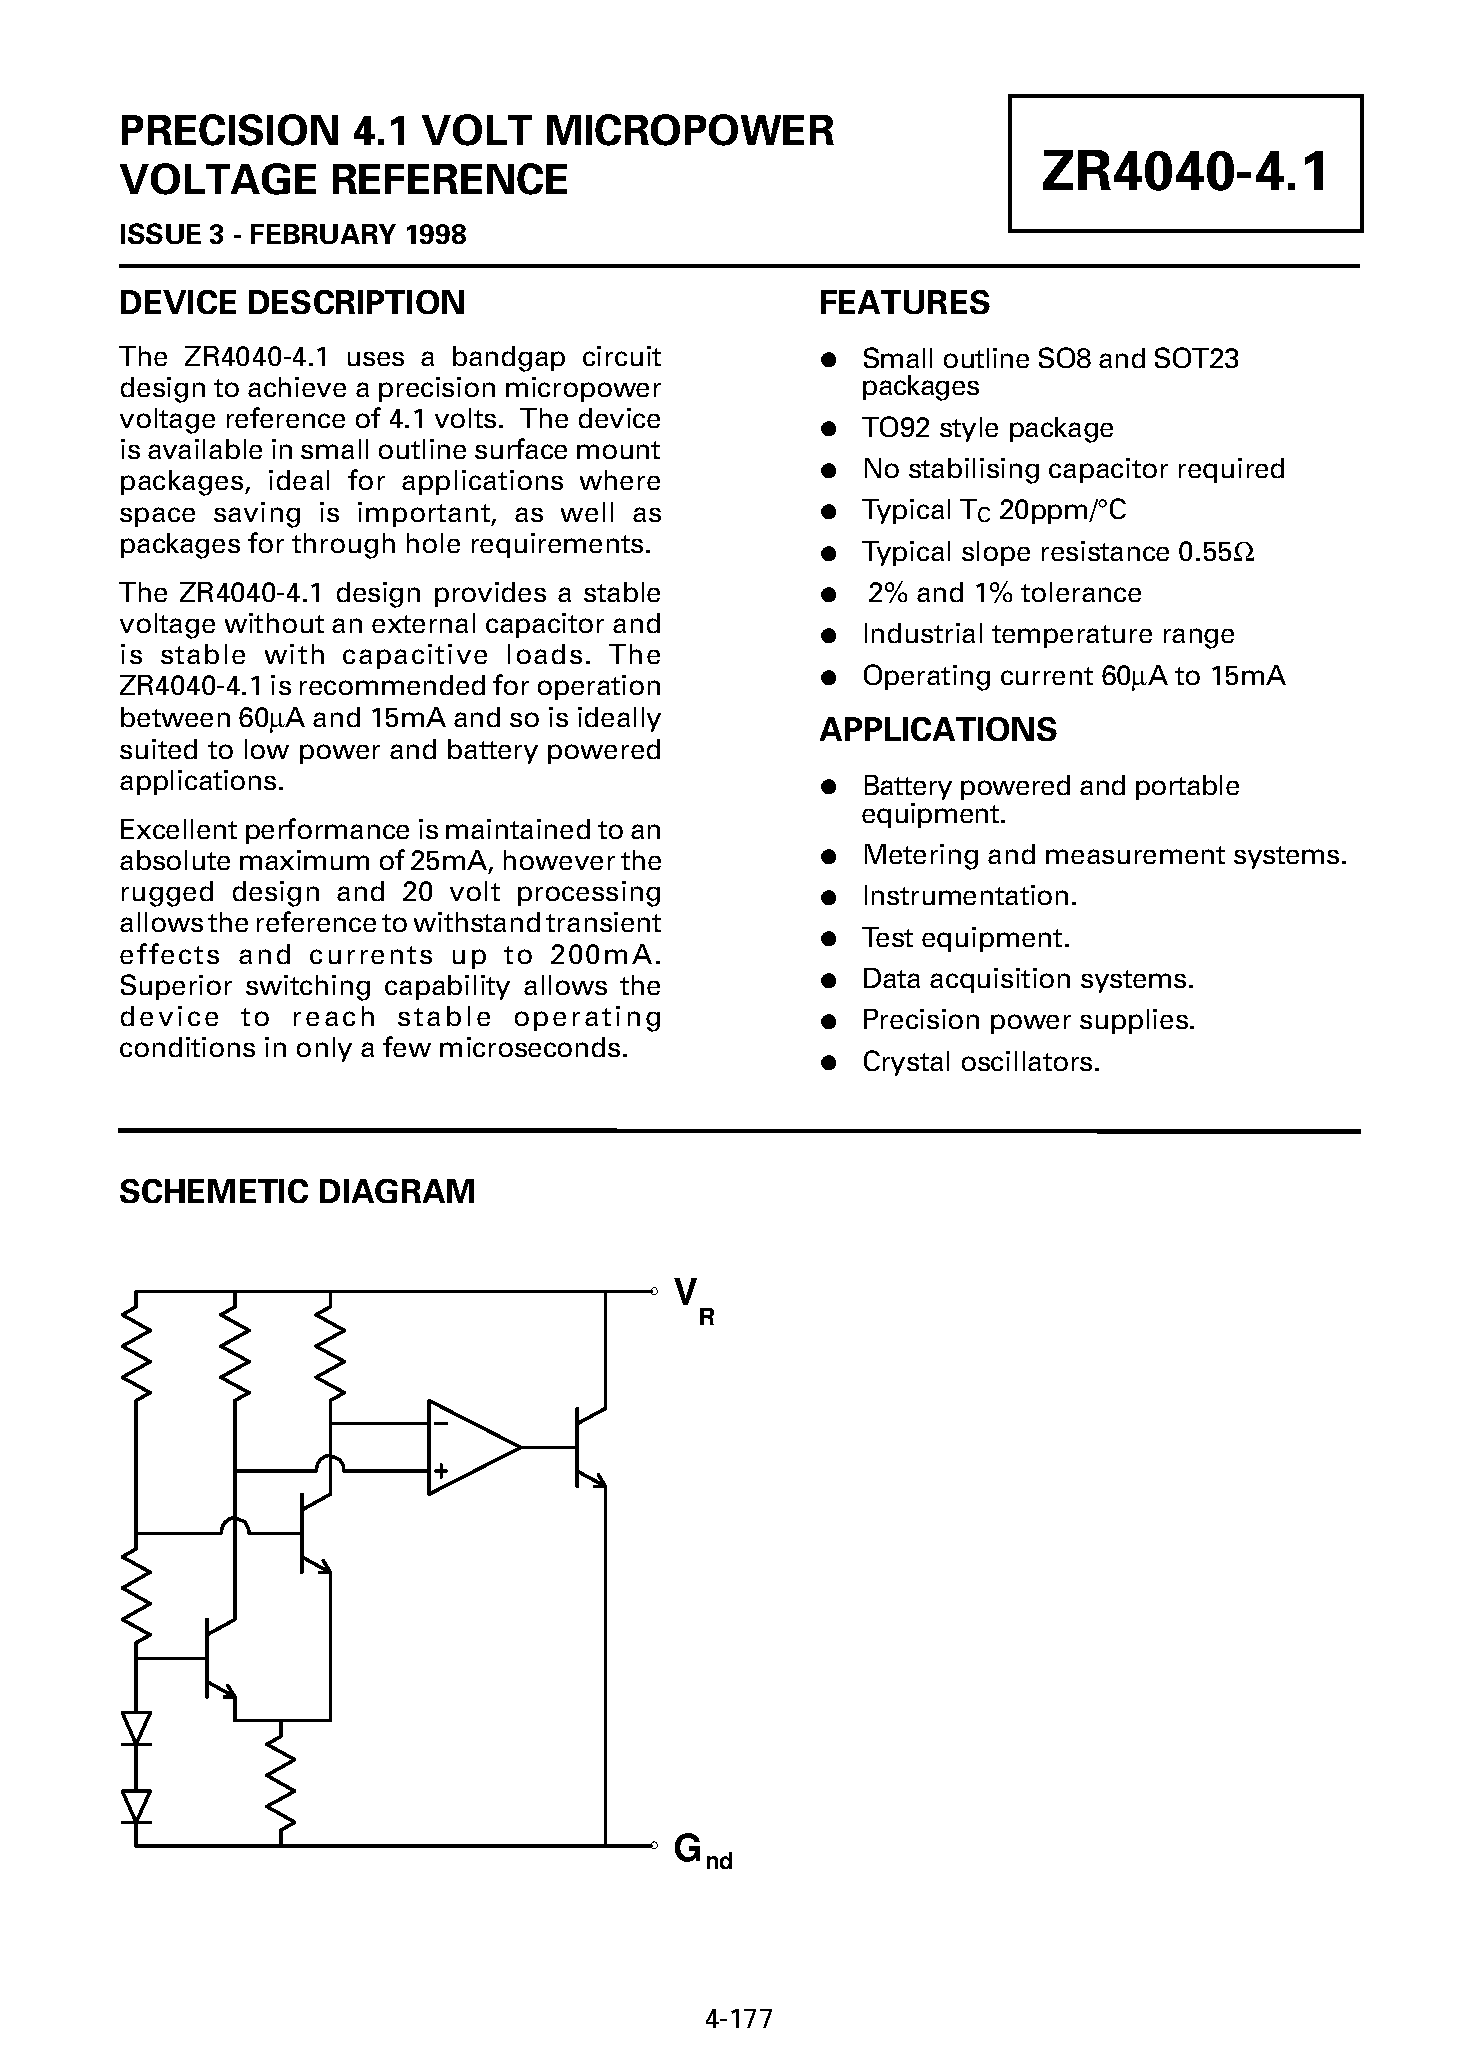 Datasheet ZR40401N841 - PRECISION 4.1 VOLT MICROPOWER VOLTAGE REFERENCE page 1